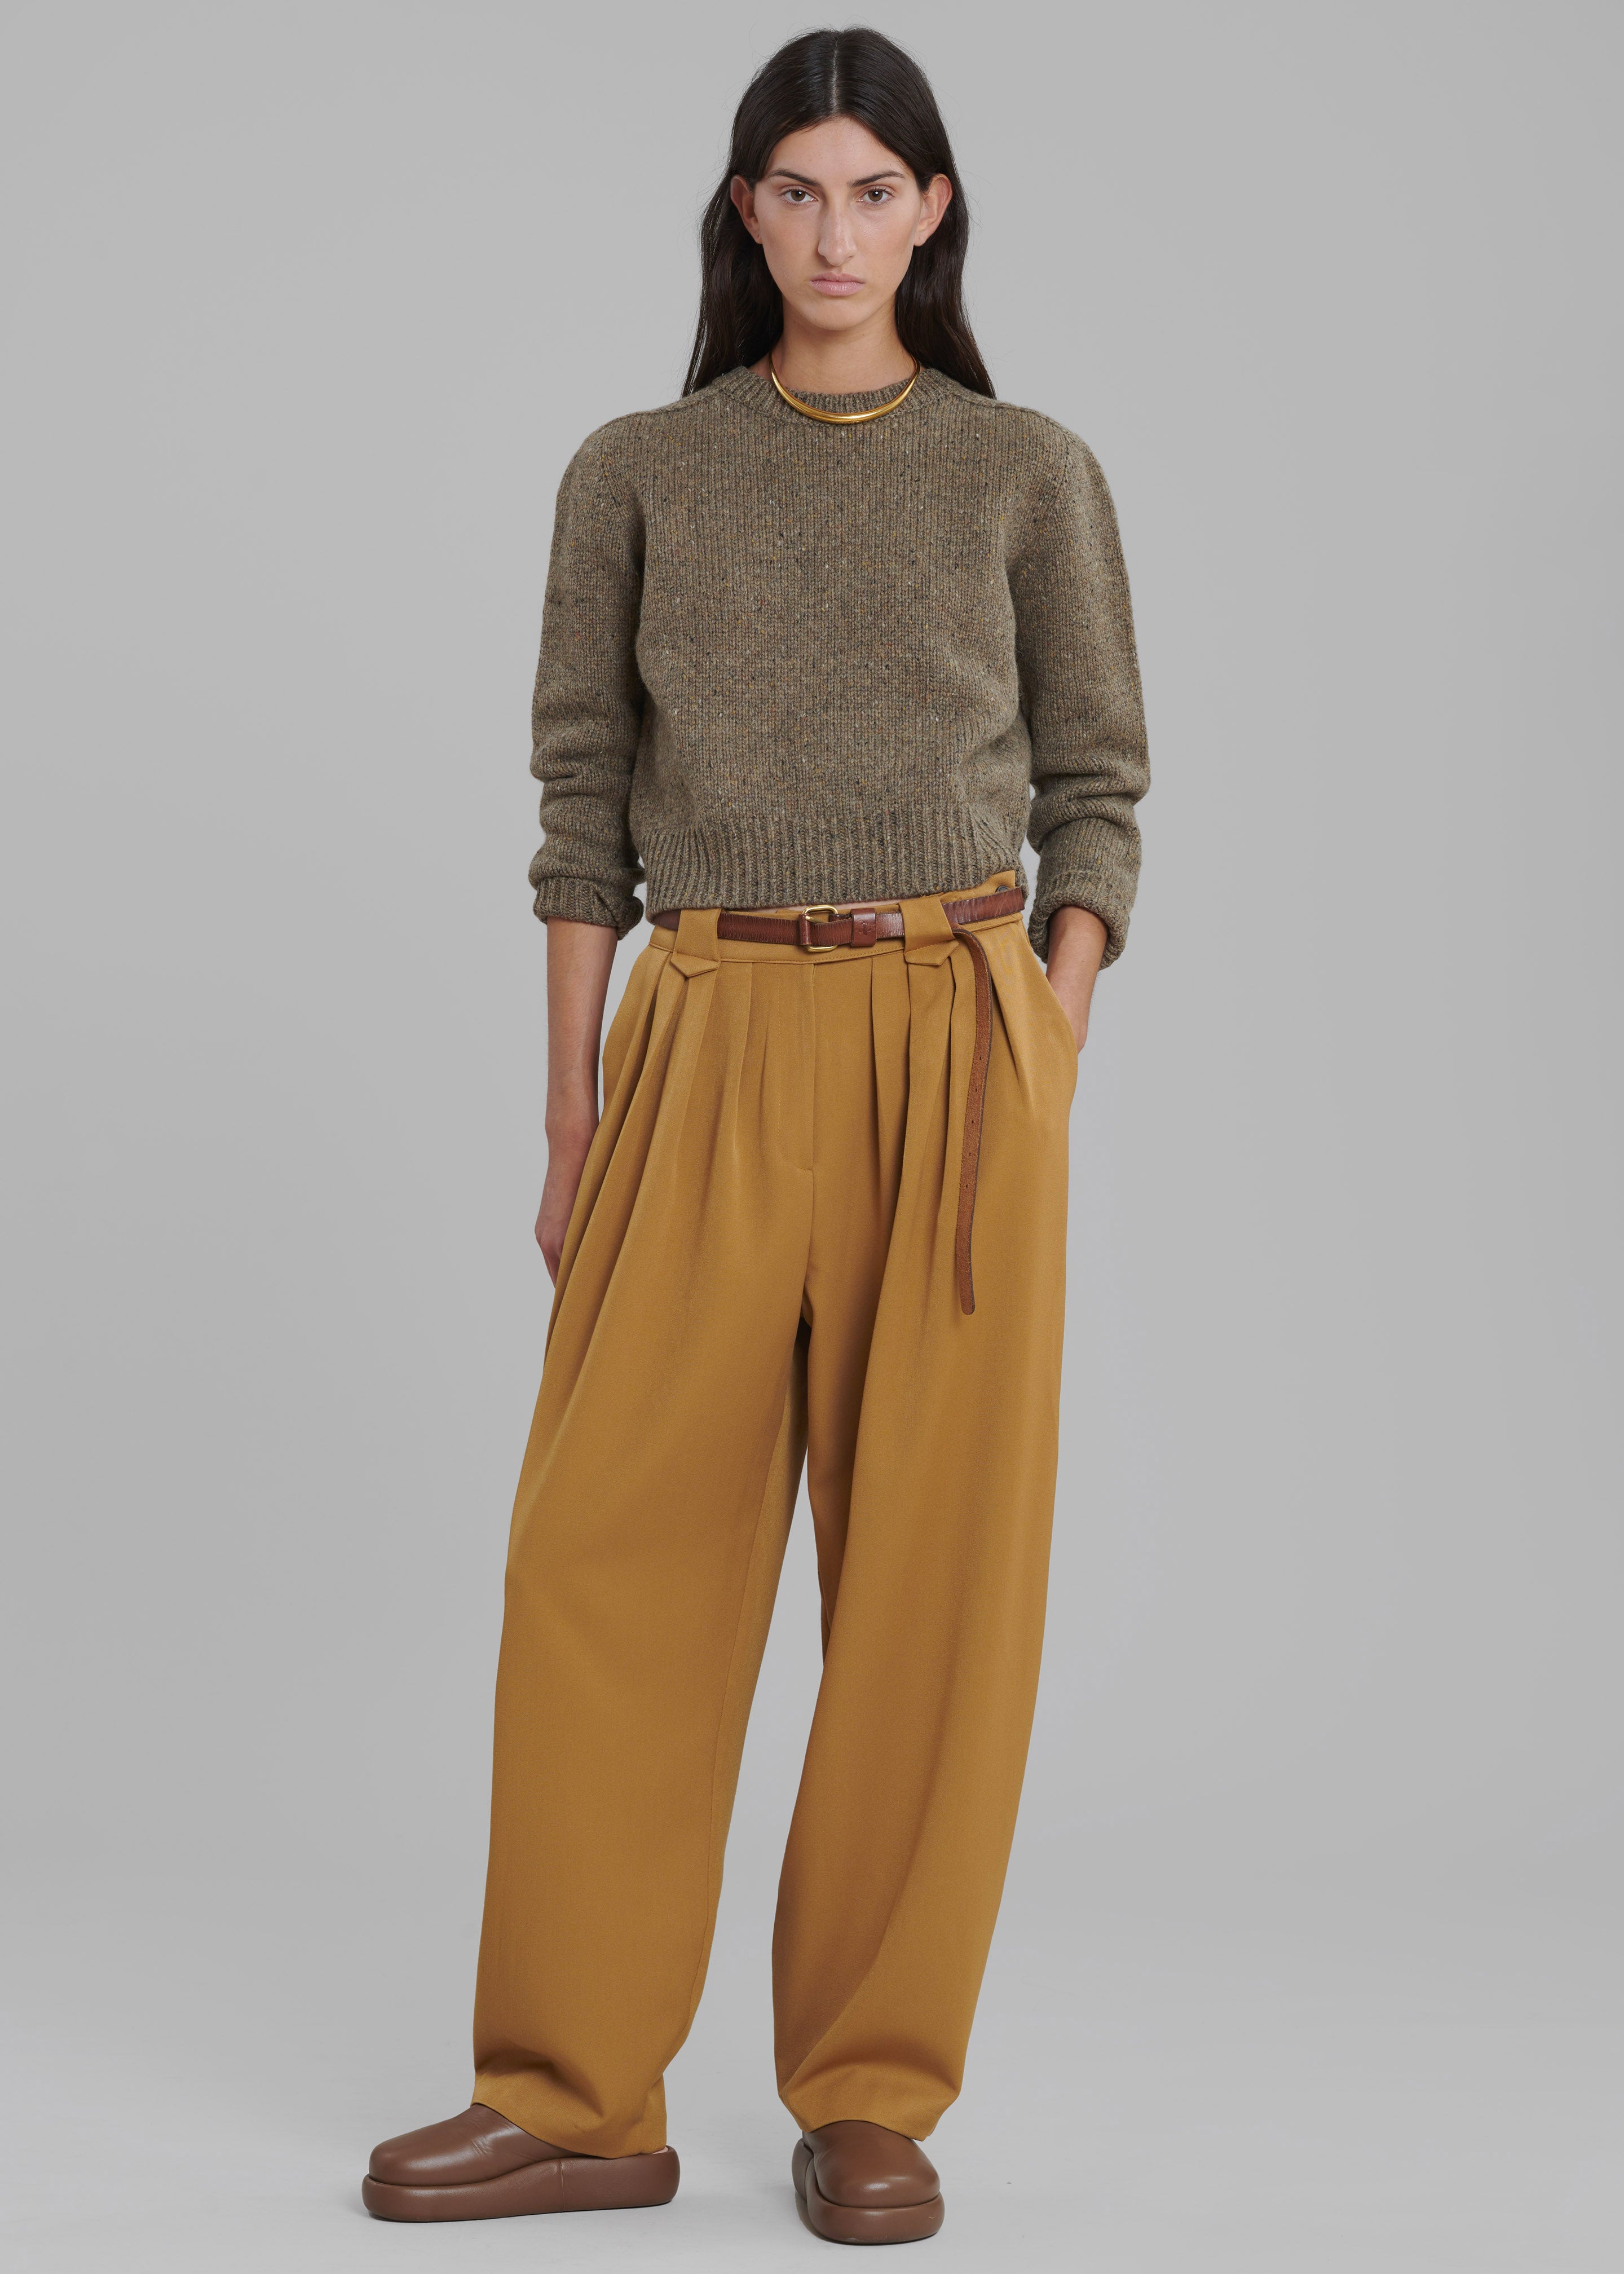 Luce Pleated Pants - Ginger - 1